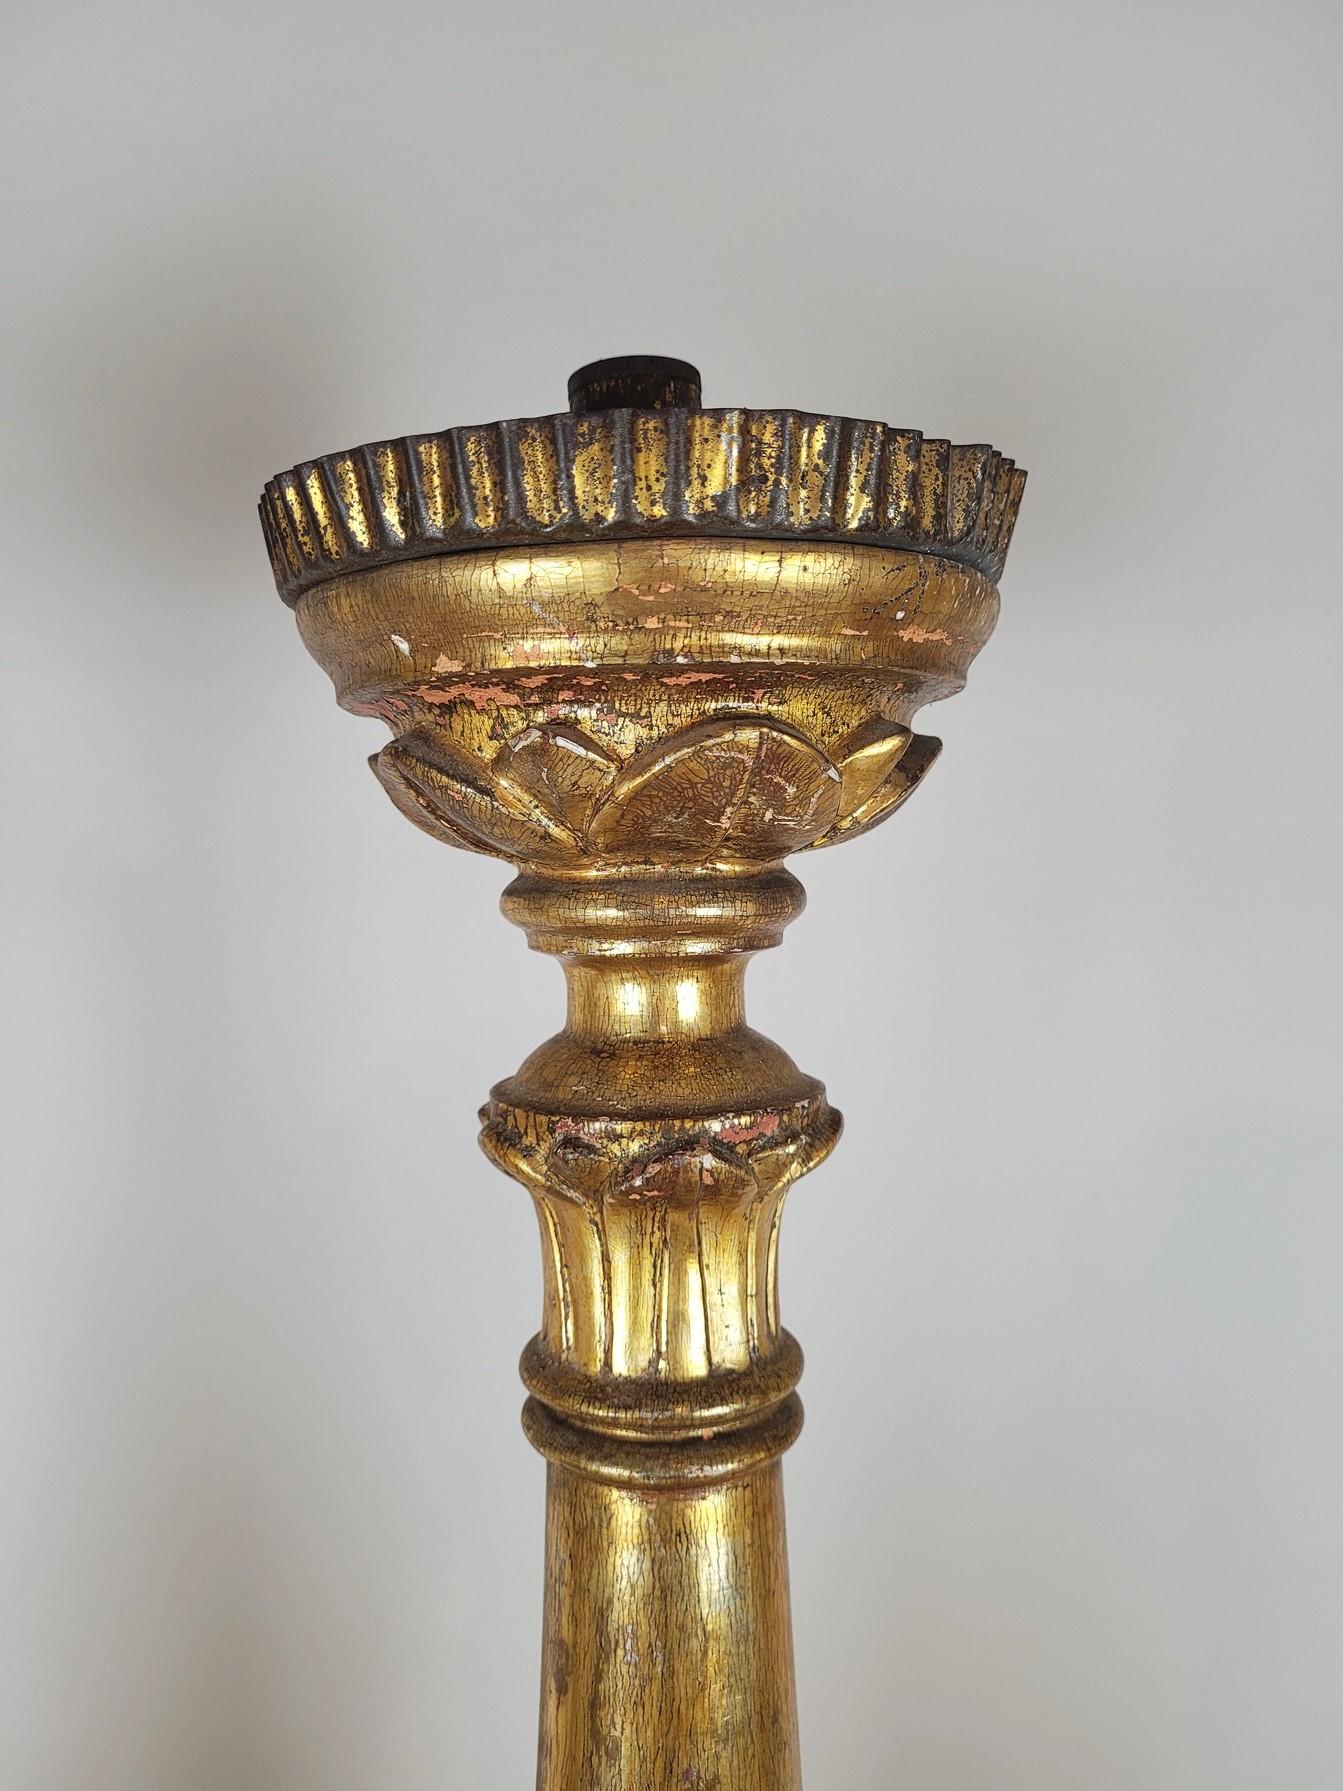 Suite Of 3 Large Candlesticks In Golden Wood, Early 19th Century For Sale 2